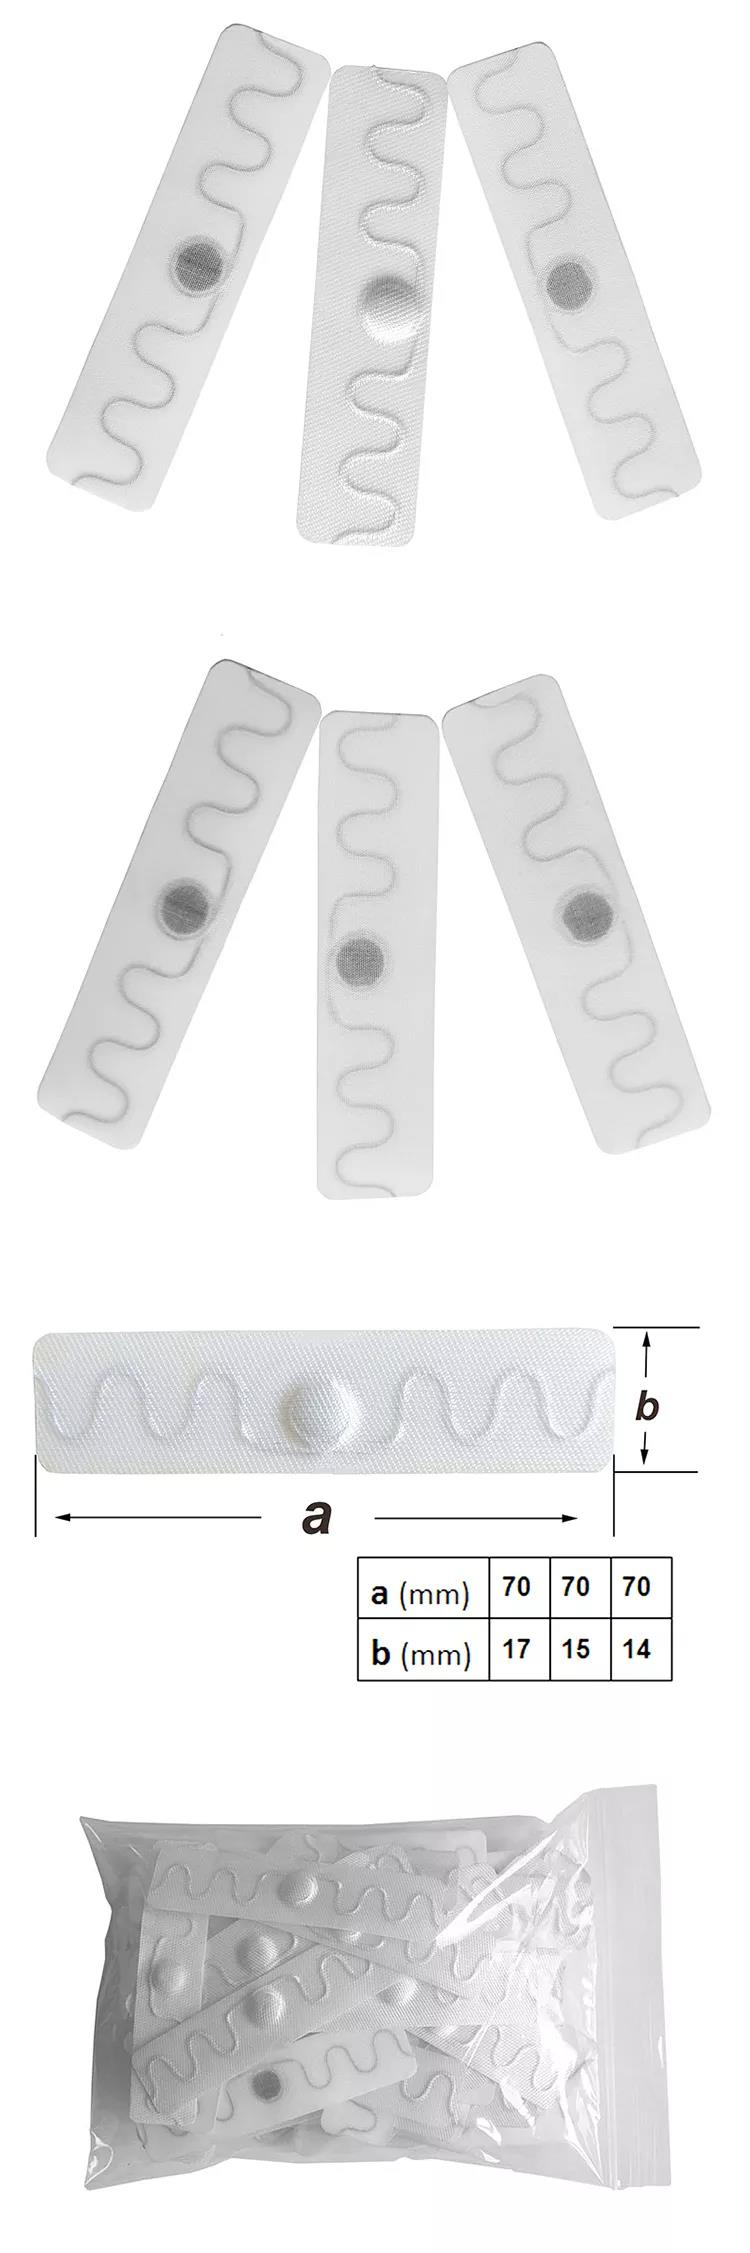 Rfid Tags For Laundry